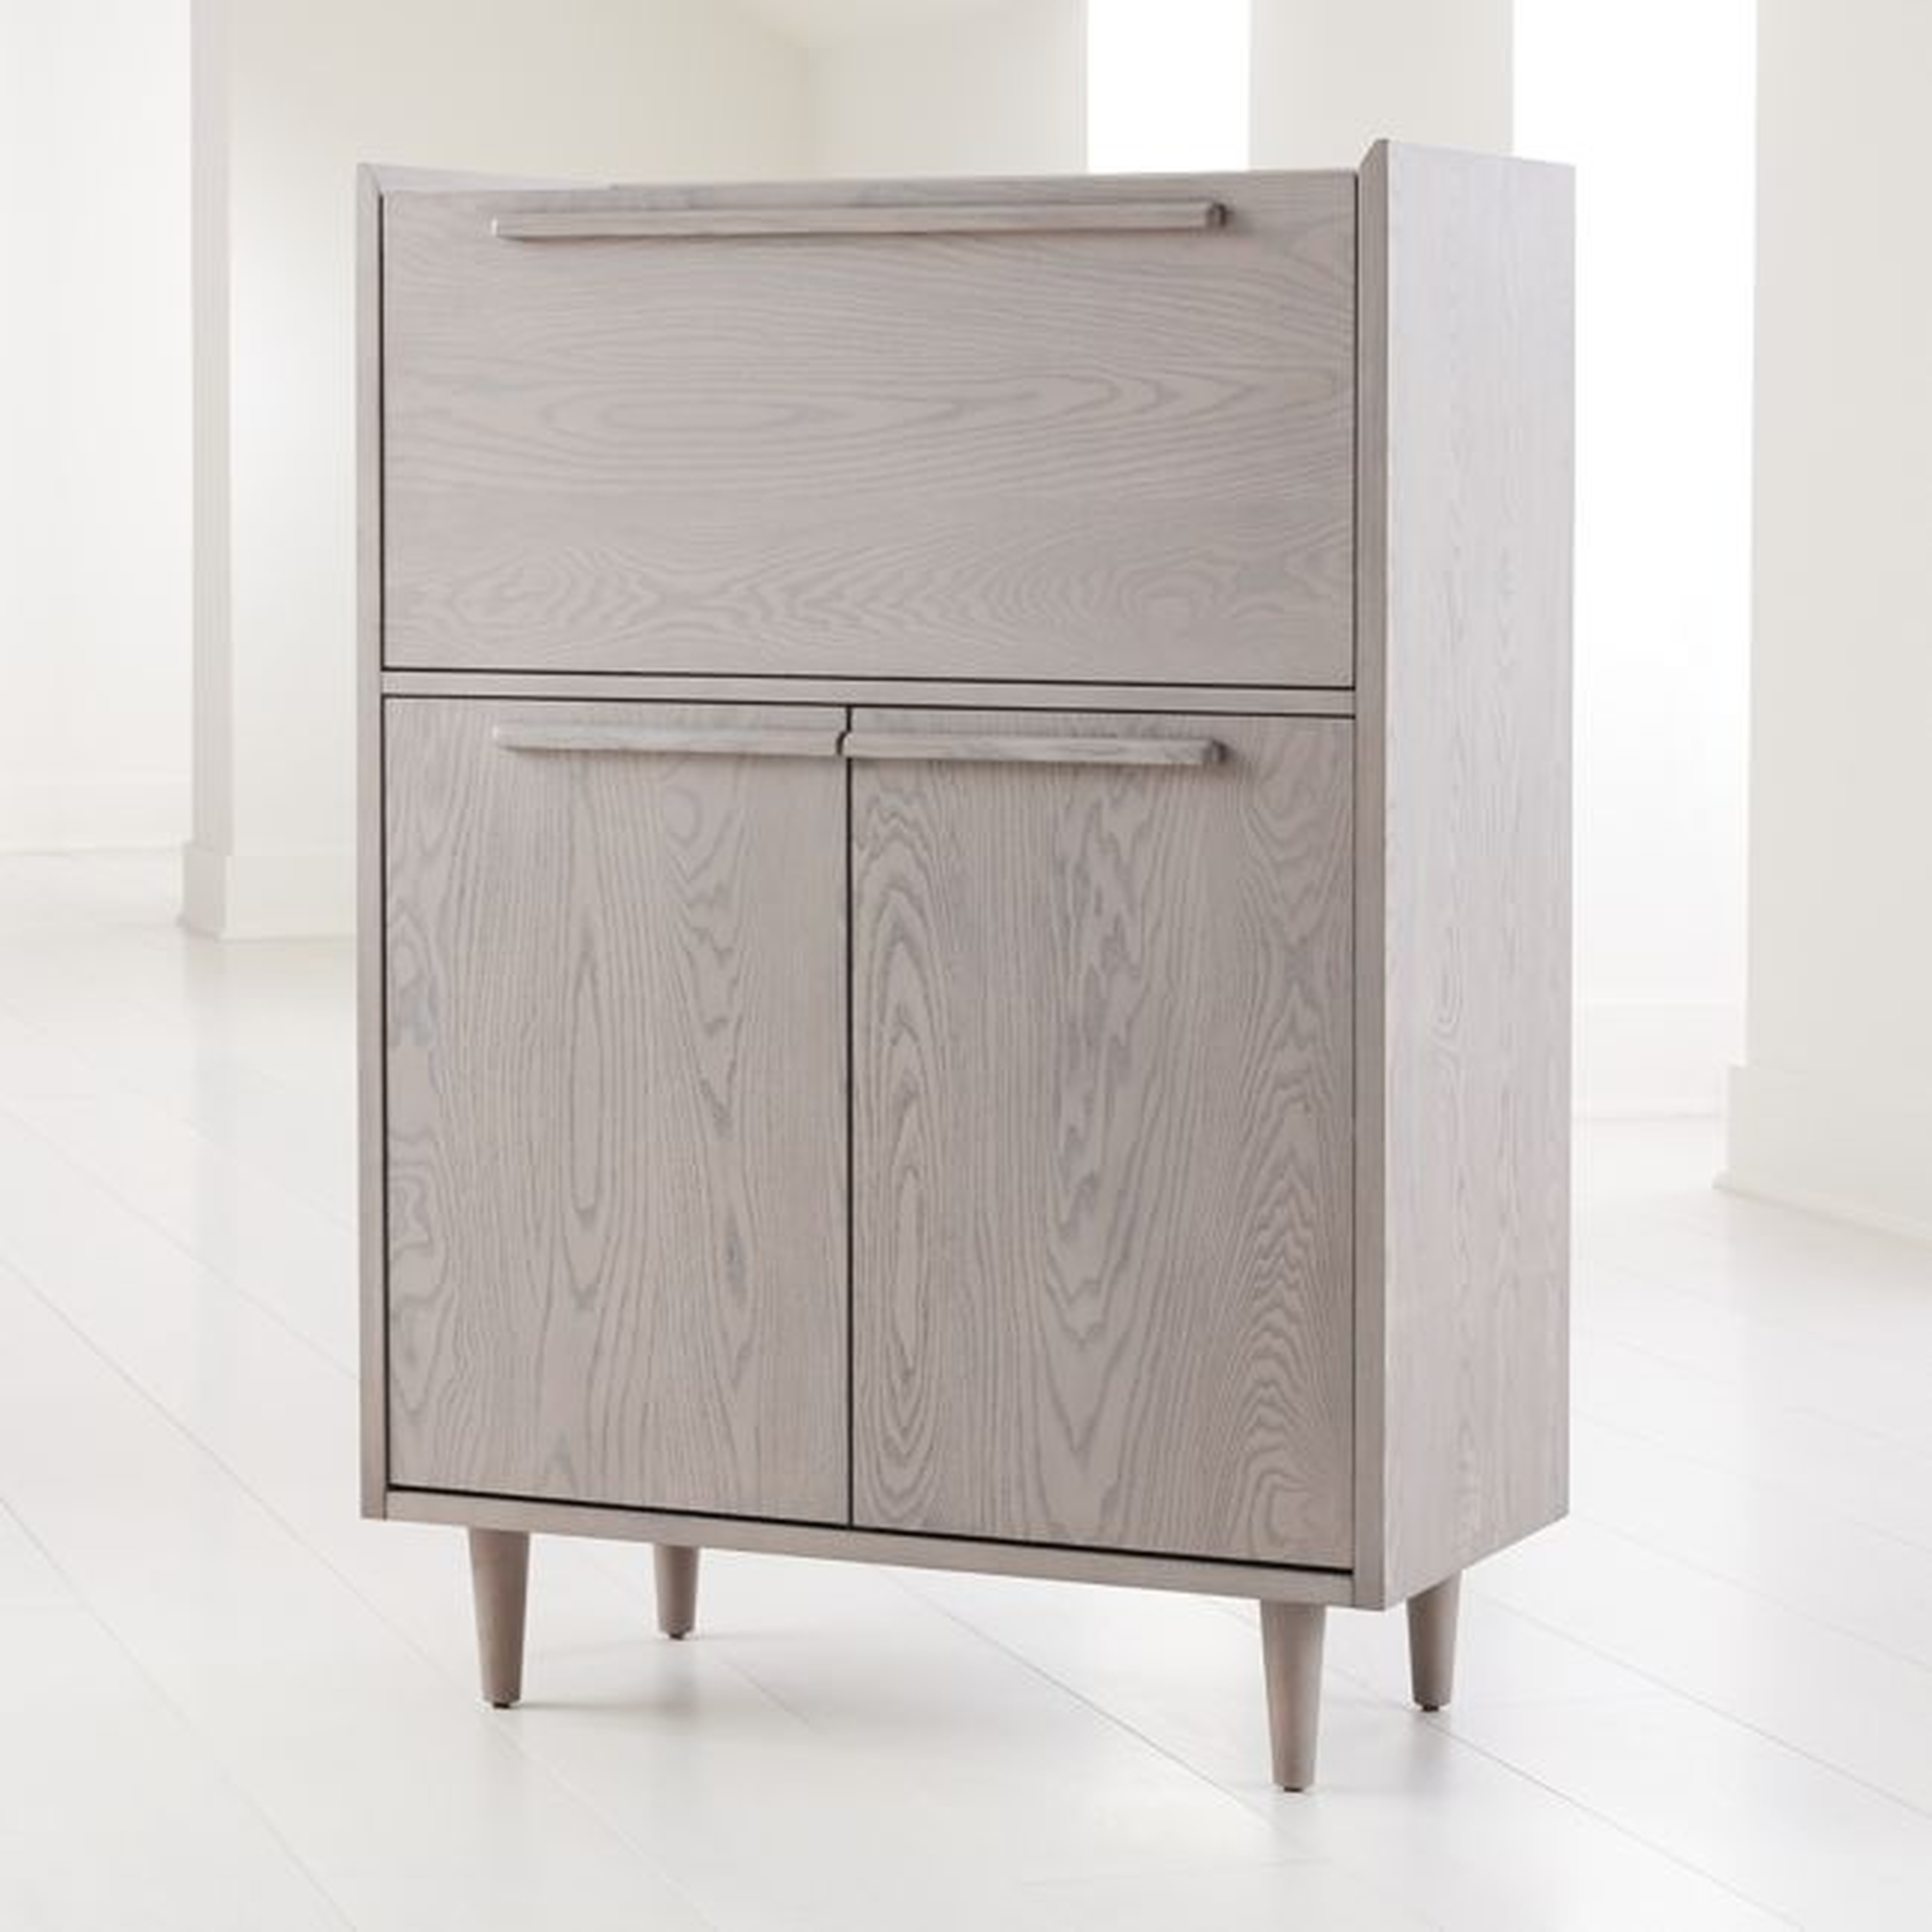 Tate Stone Bar Cabinet with Light - Crate and Barrel